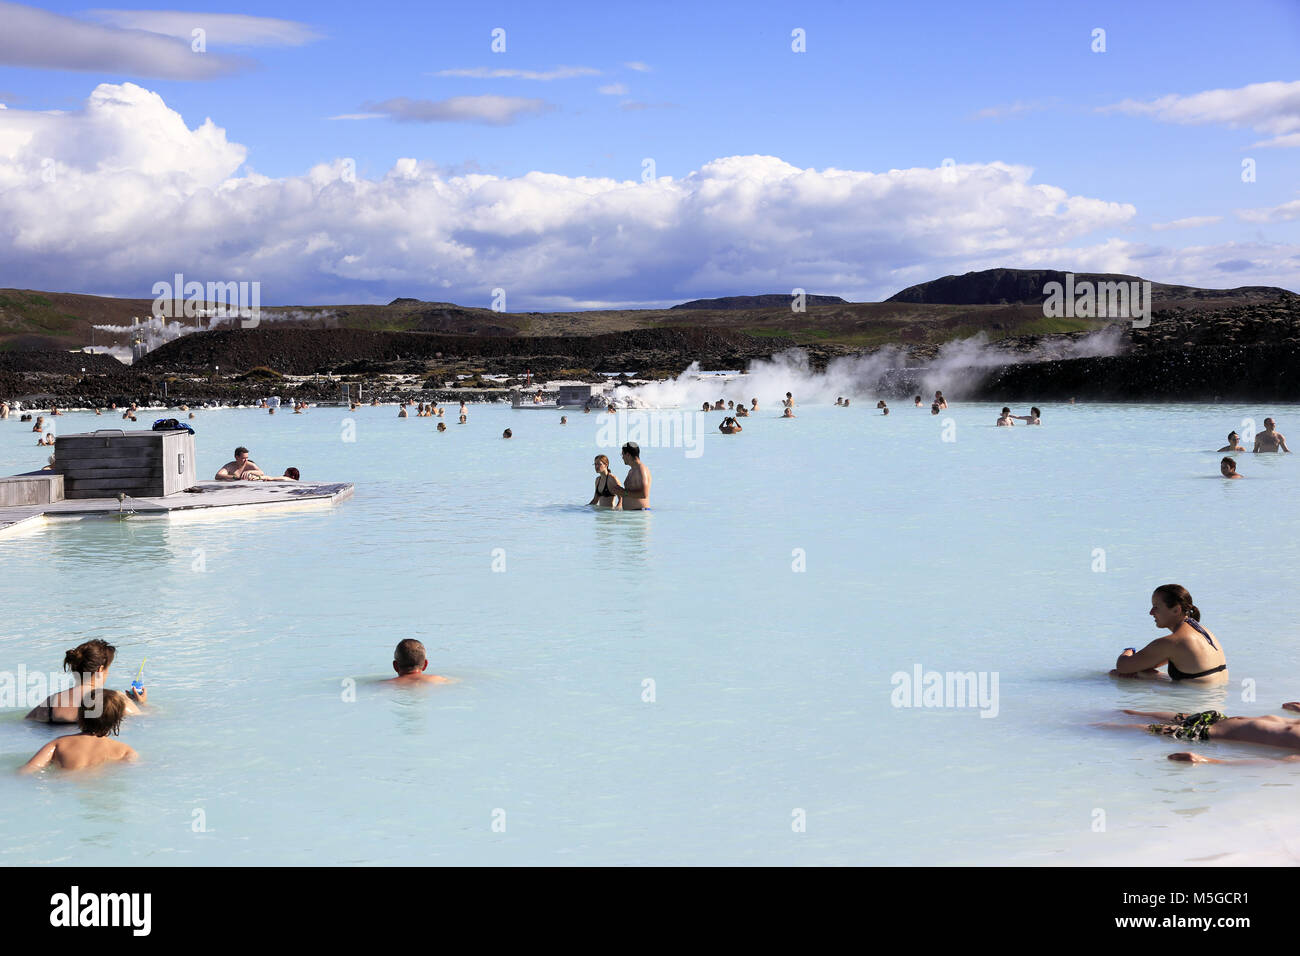 Visitors relax in the geothermal spa of the Blue Lagoon with Svartsengi geothermal power plant in the background.near Reykjavik.Iceland Stock Photo